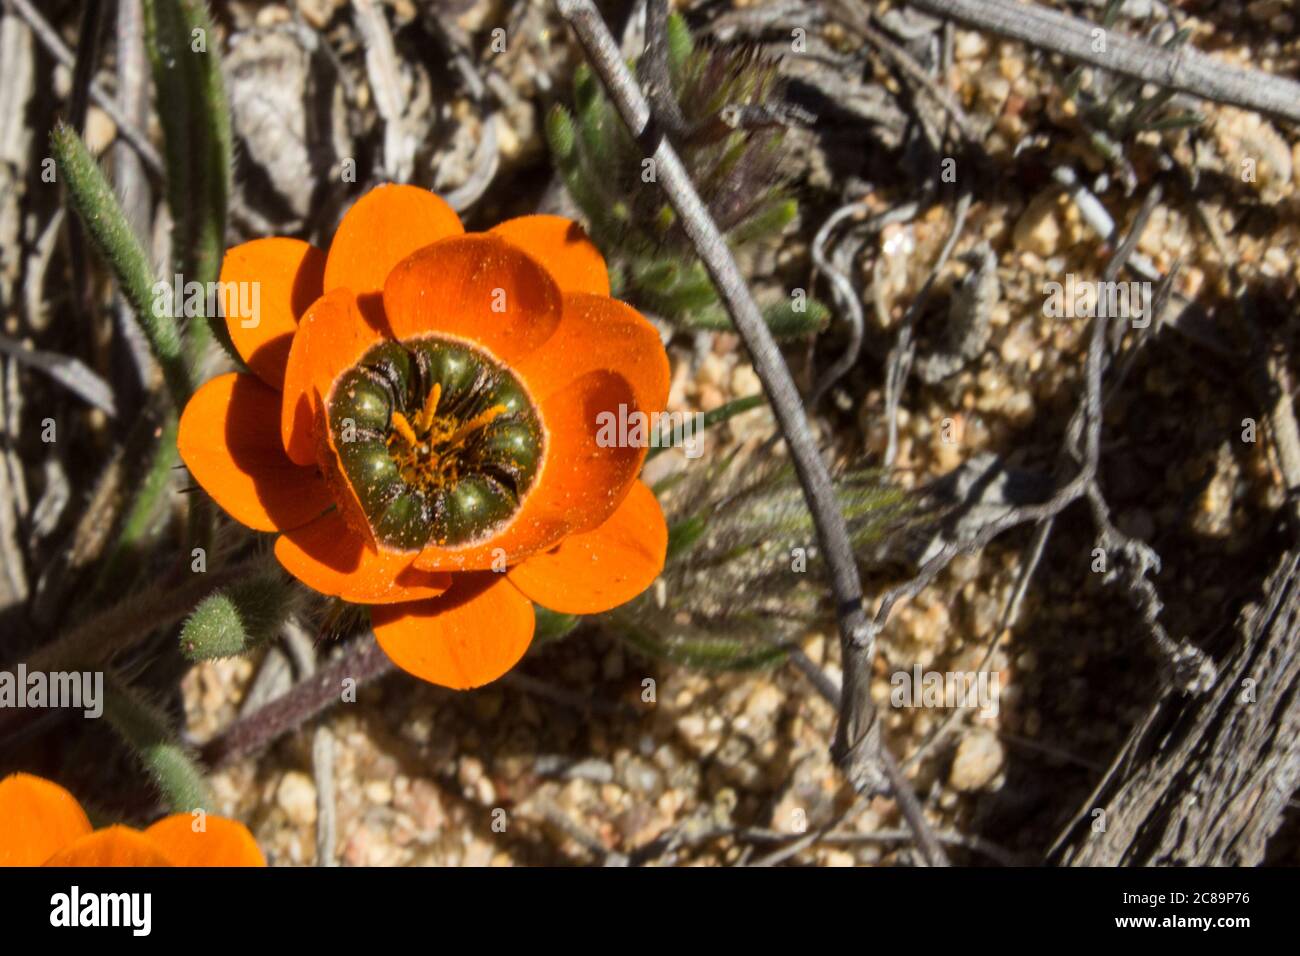 A variation of a beetle Daisy (Gorteria Diffusa) named for its Mimicry of beetles at the base of its petals, in Namaqua National Park, South Africa Stock Photo